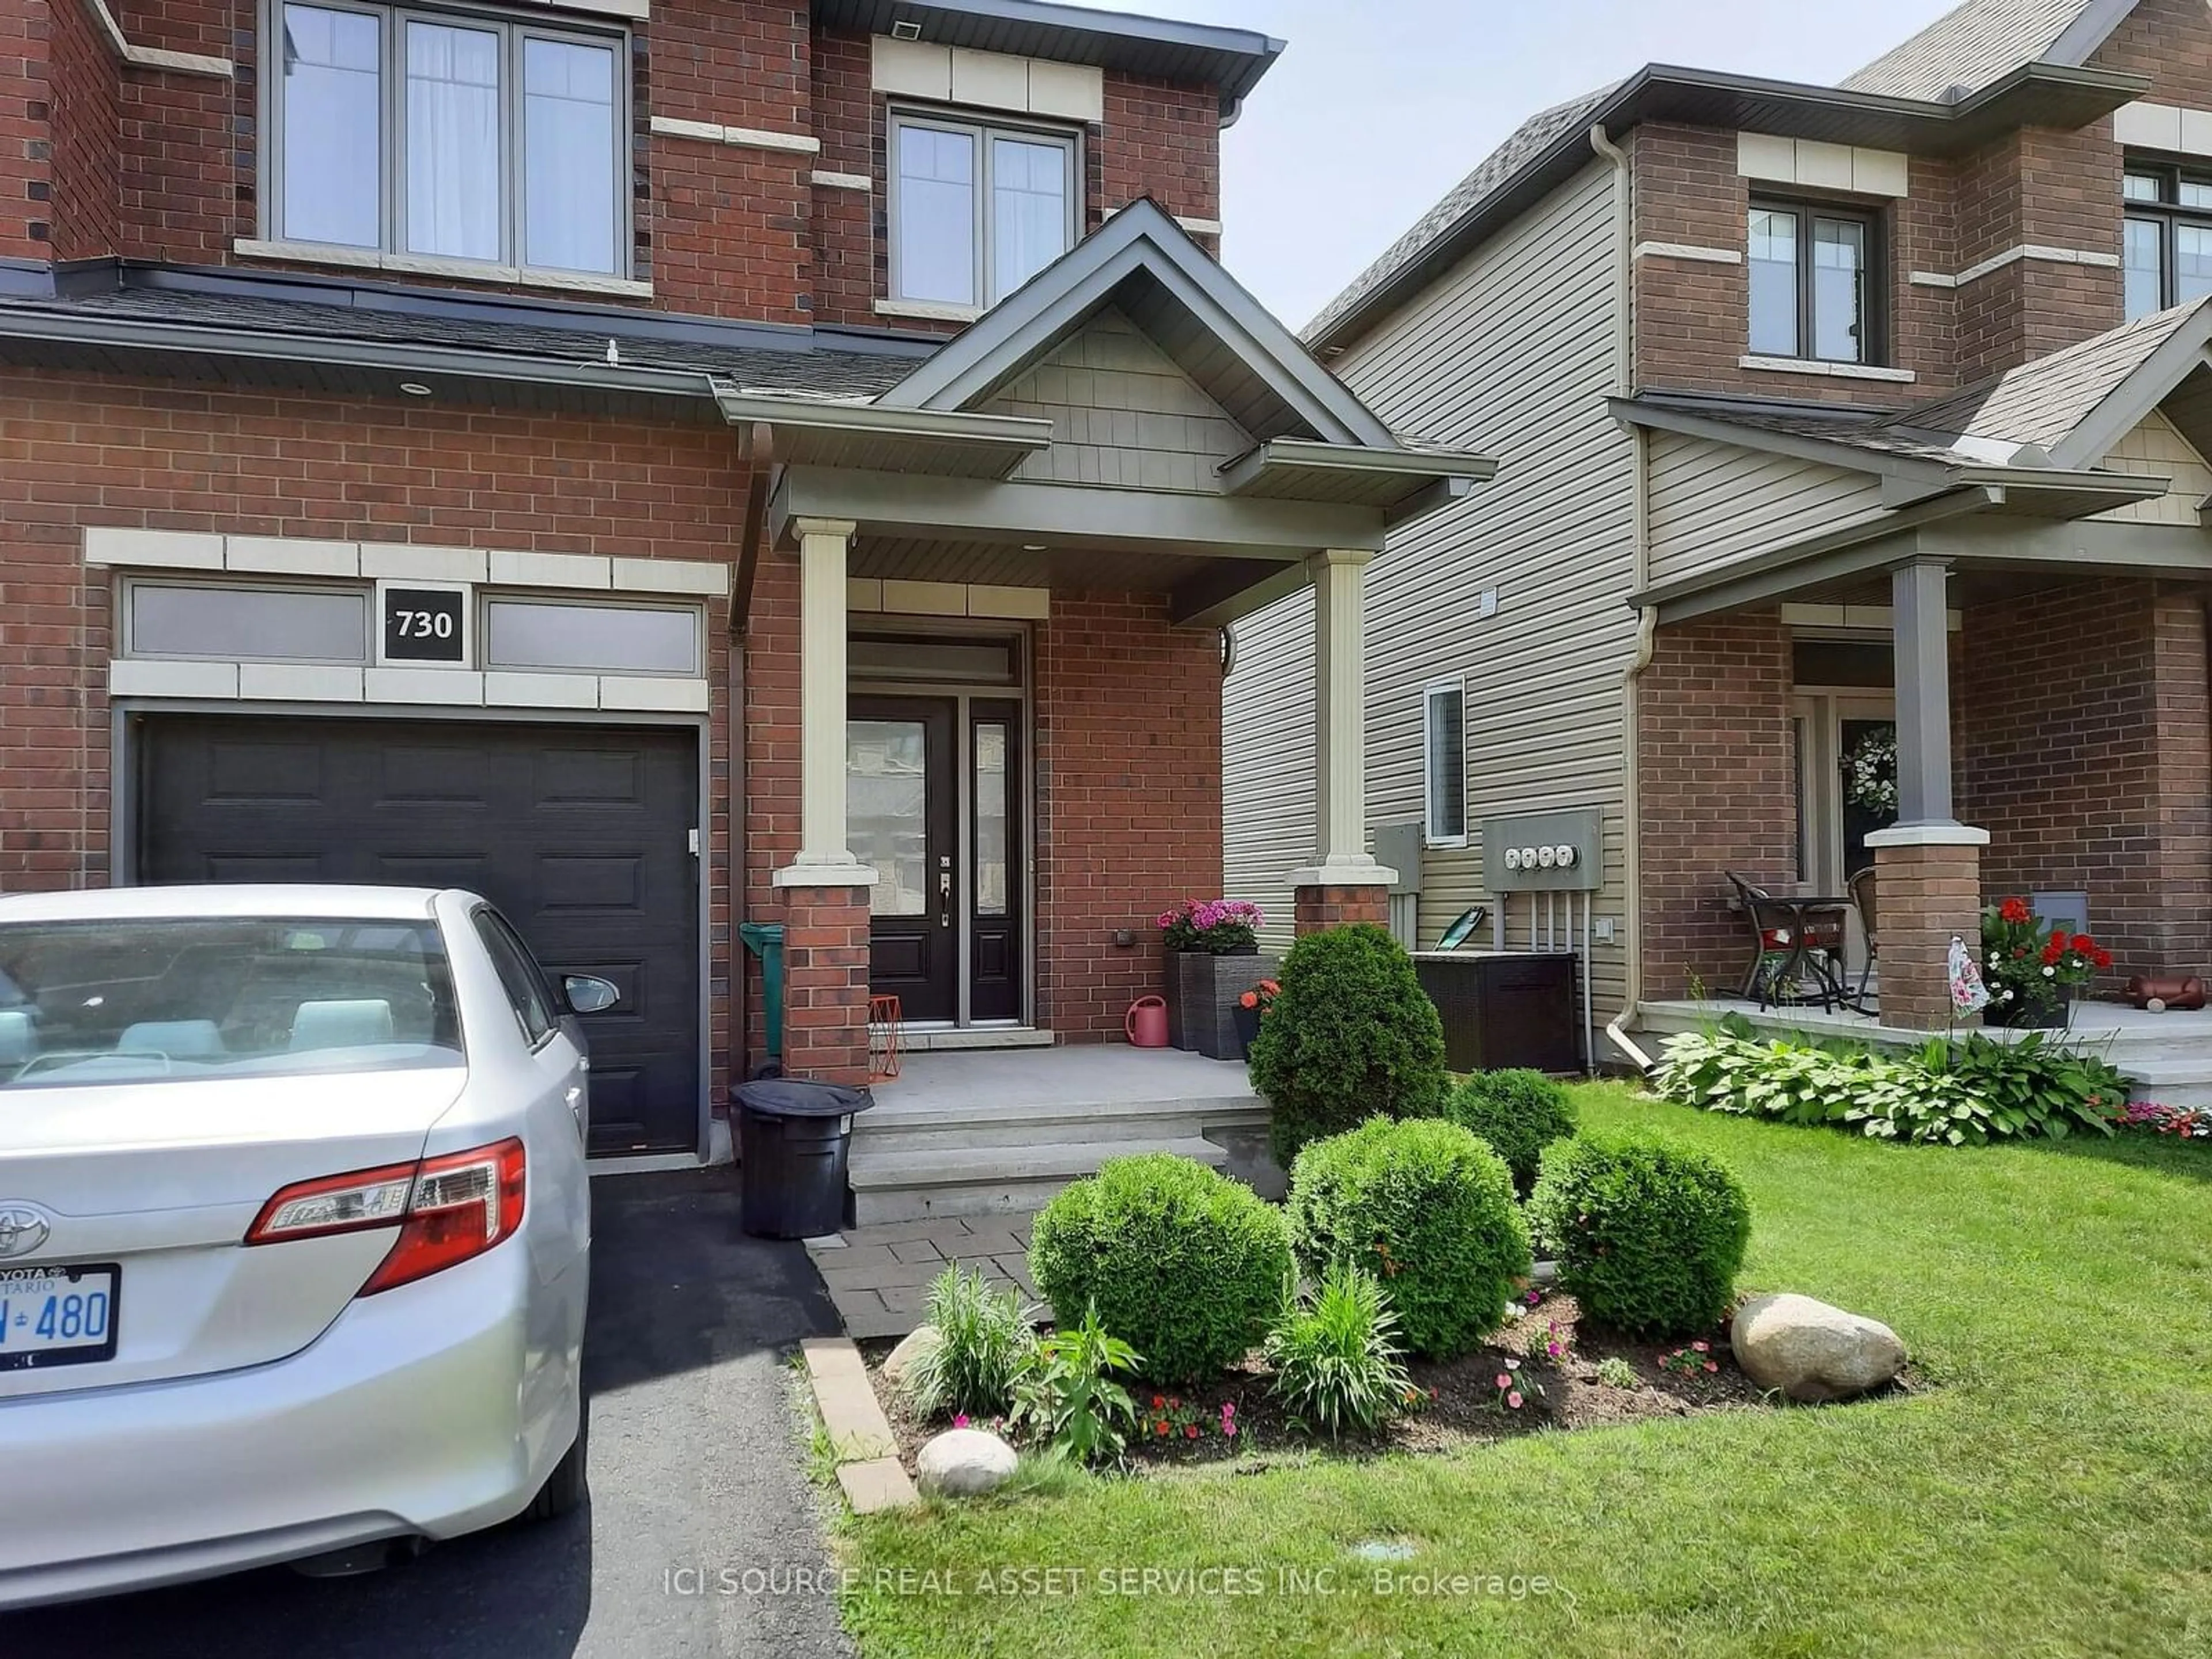 Home with brick exterior material for 730 Teasel Way, Ottawa Ontario K1T 3X1